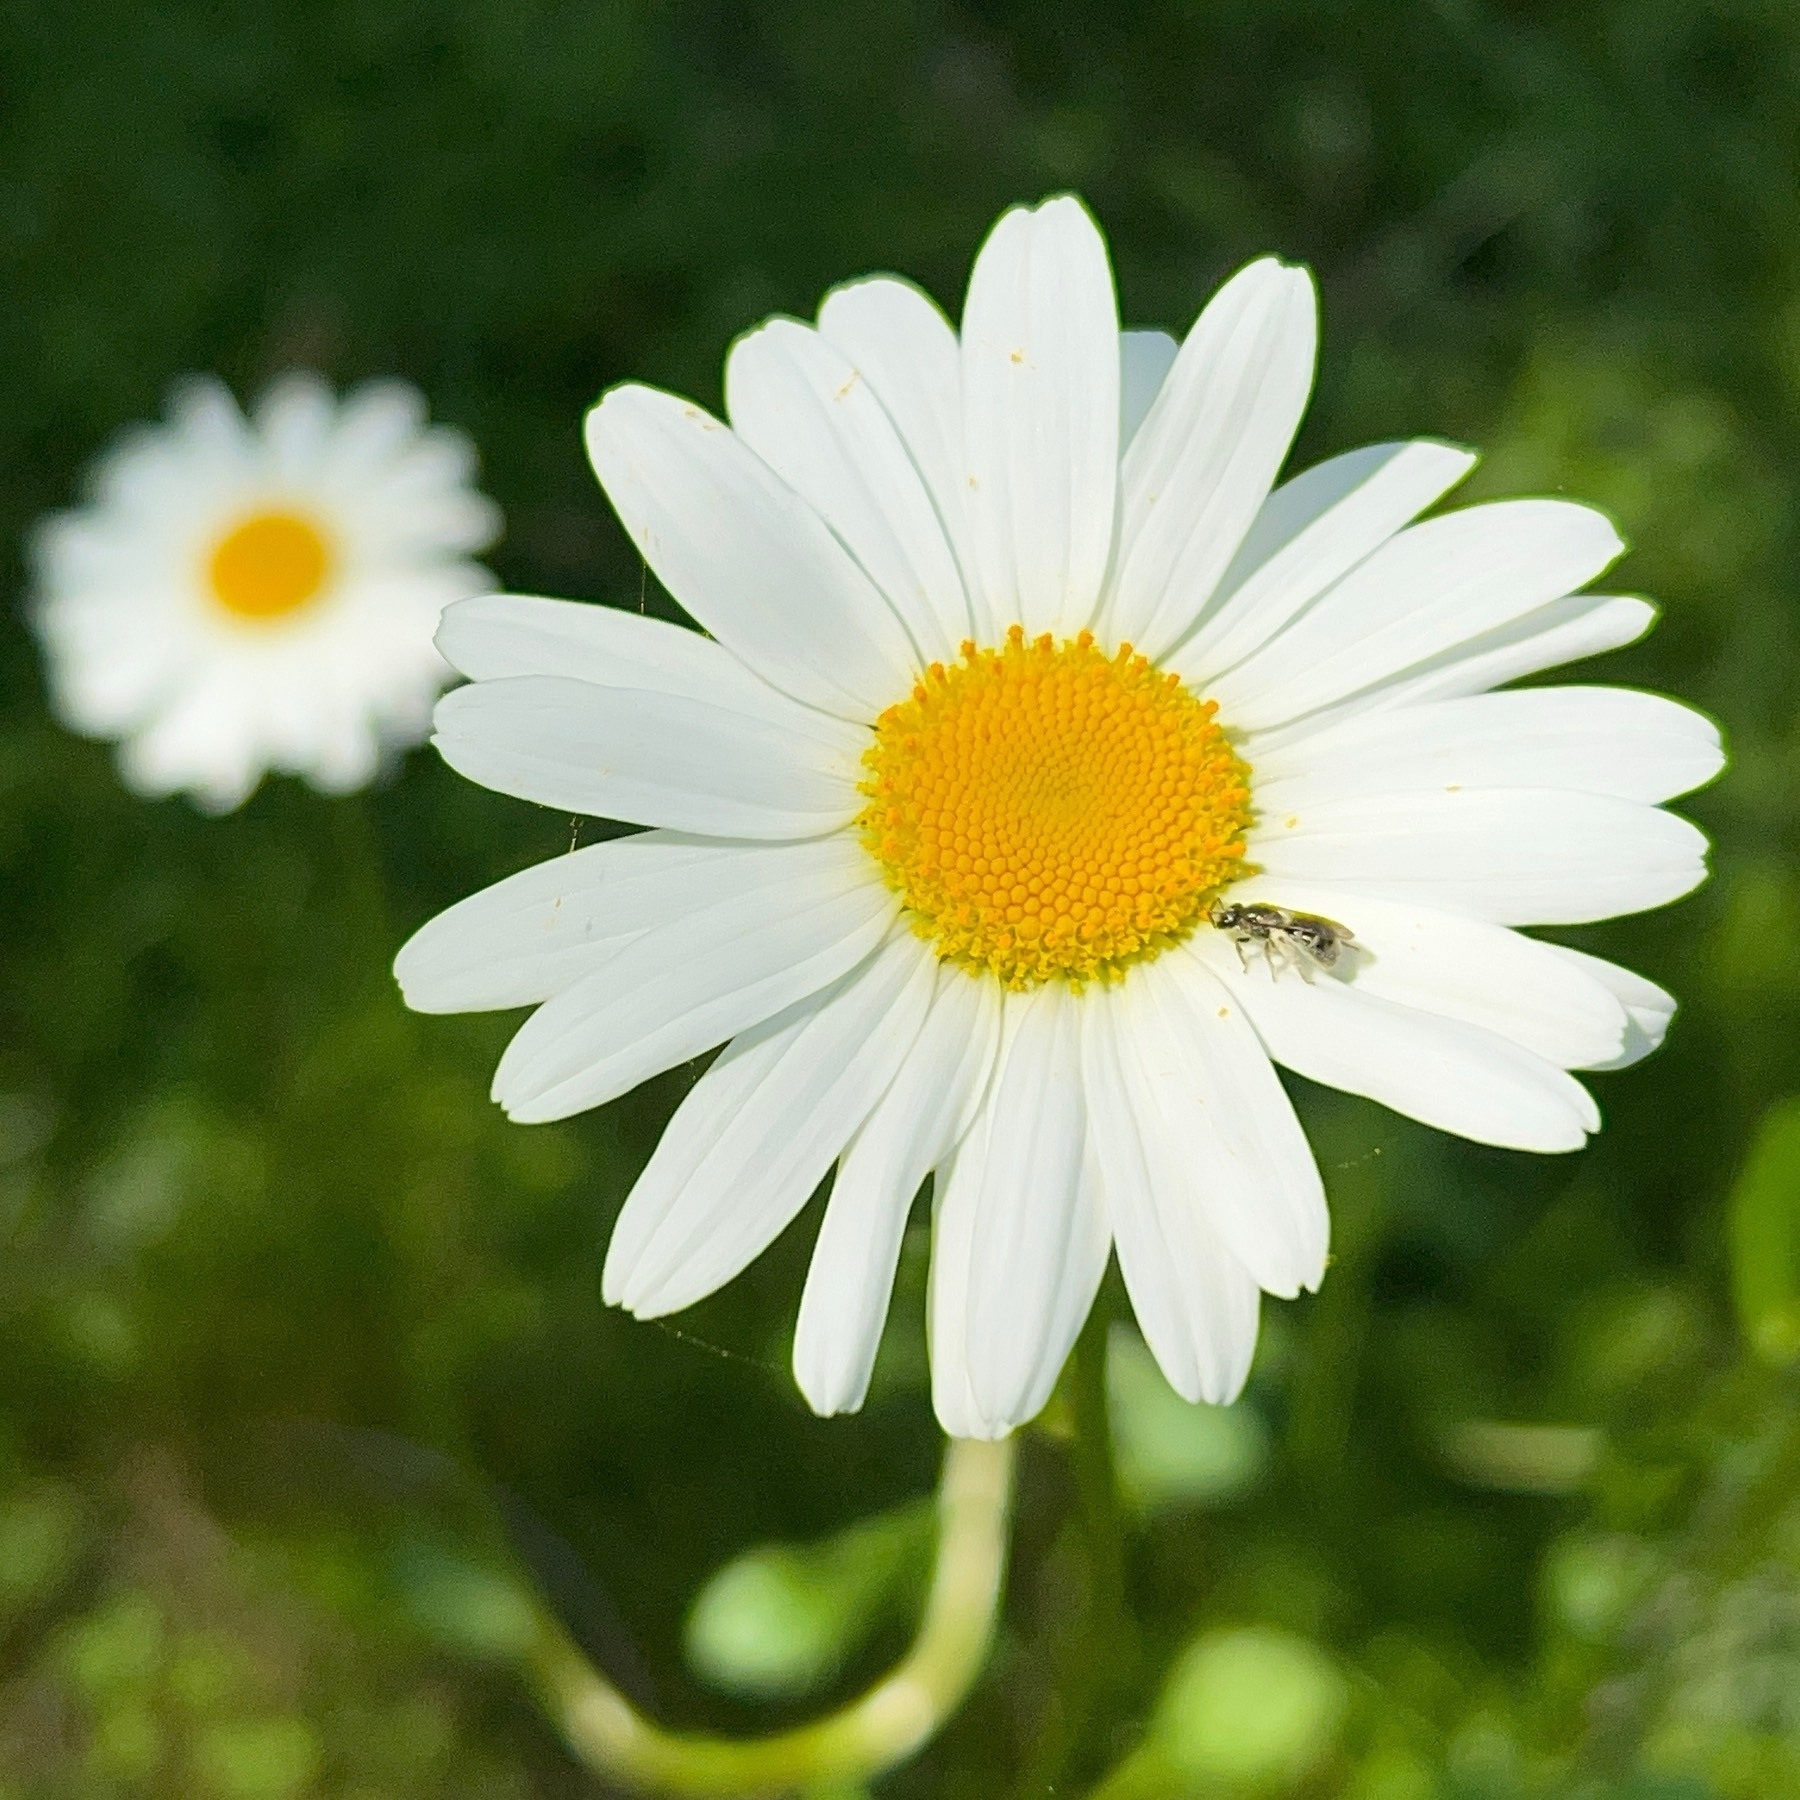 White daisy with yellow centre with a tiny fly on one of the petals close to the centre. 